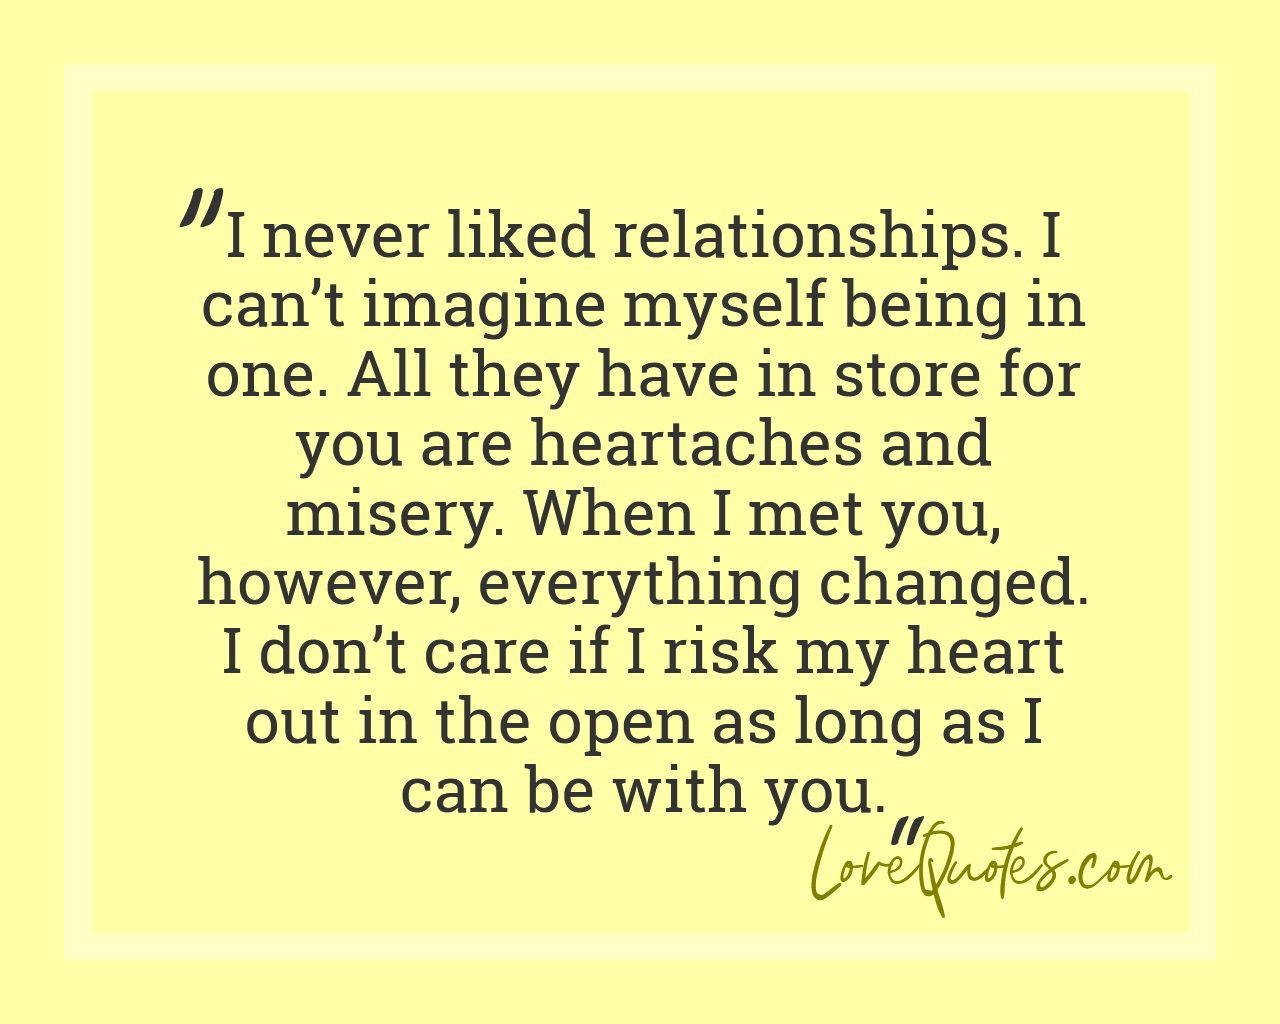 I Risk My Heart - Love Quotes